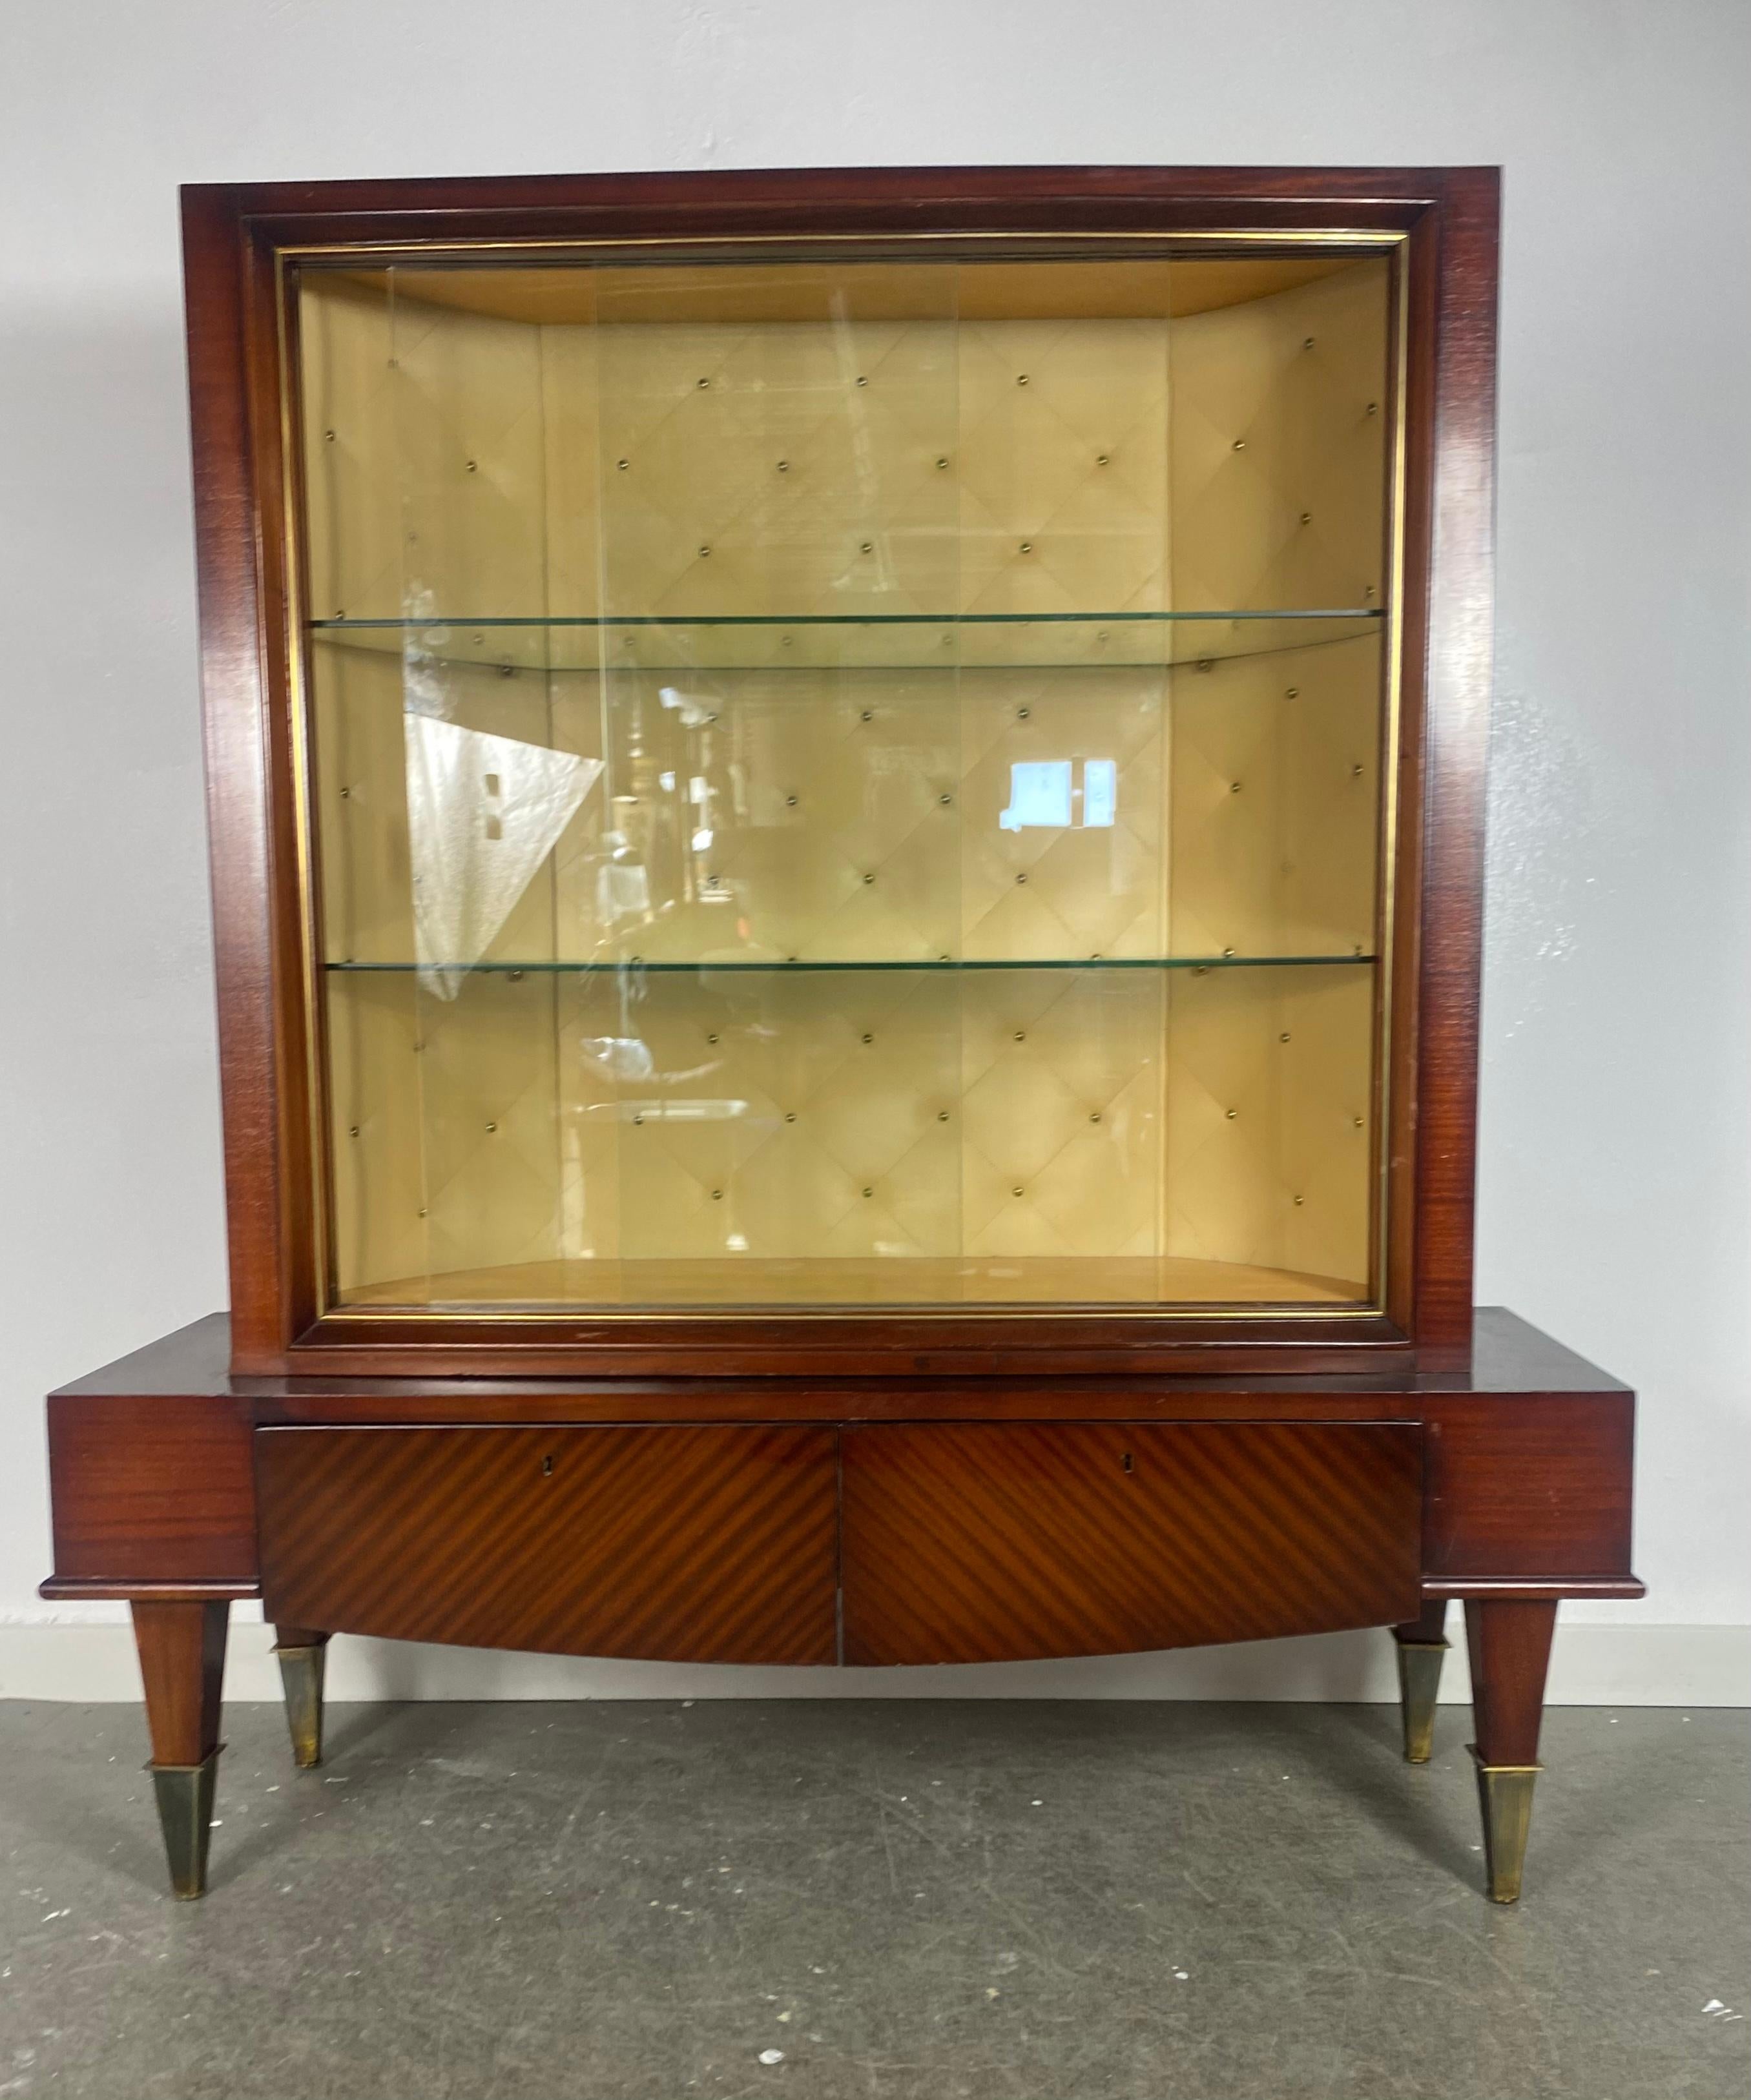 Stunning French Art Deco / Moderne' vitrine, bar, cabinet attrib. to Jules Leleu 1940s. Classic design, wonderful grained cherry mahogany wood. Button-tufted interior, two glass shelves, sliding doors. Two lower drawers. Nice brass cap accents to